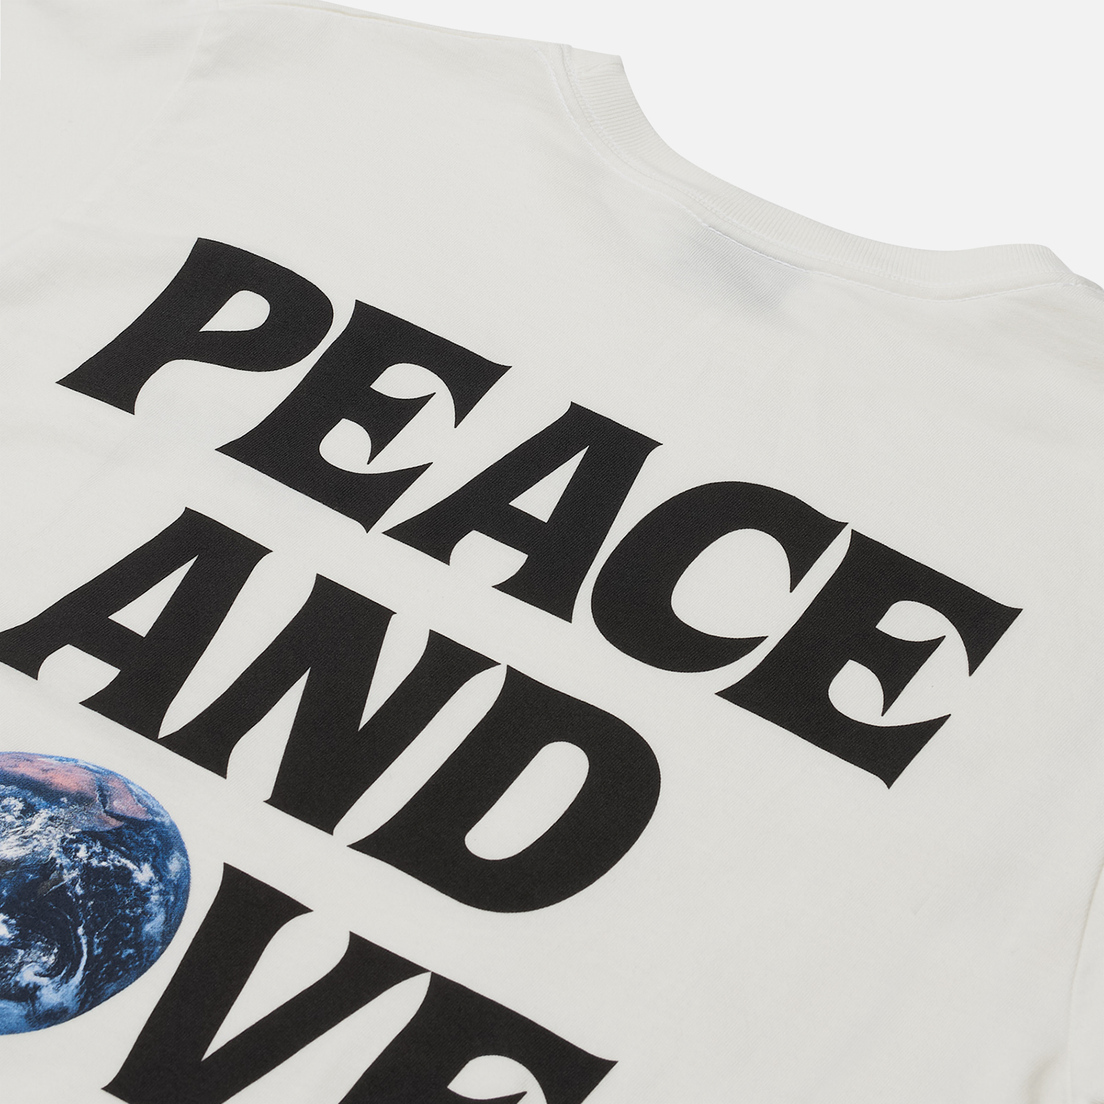 Stussy Женская футболка Peace And Love Pigment Dyed